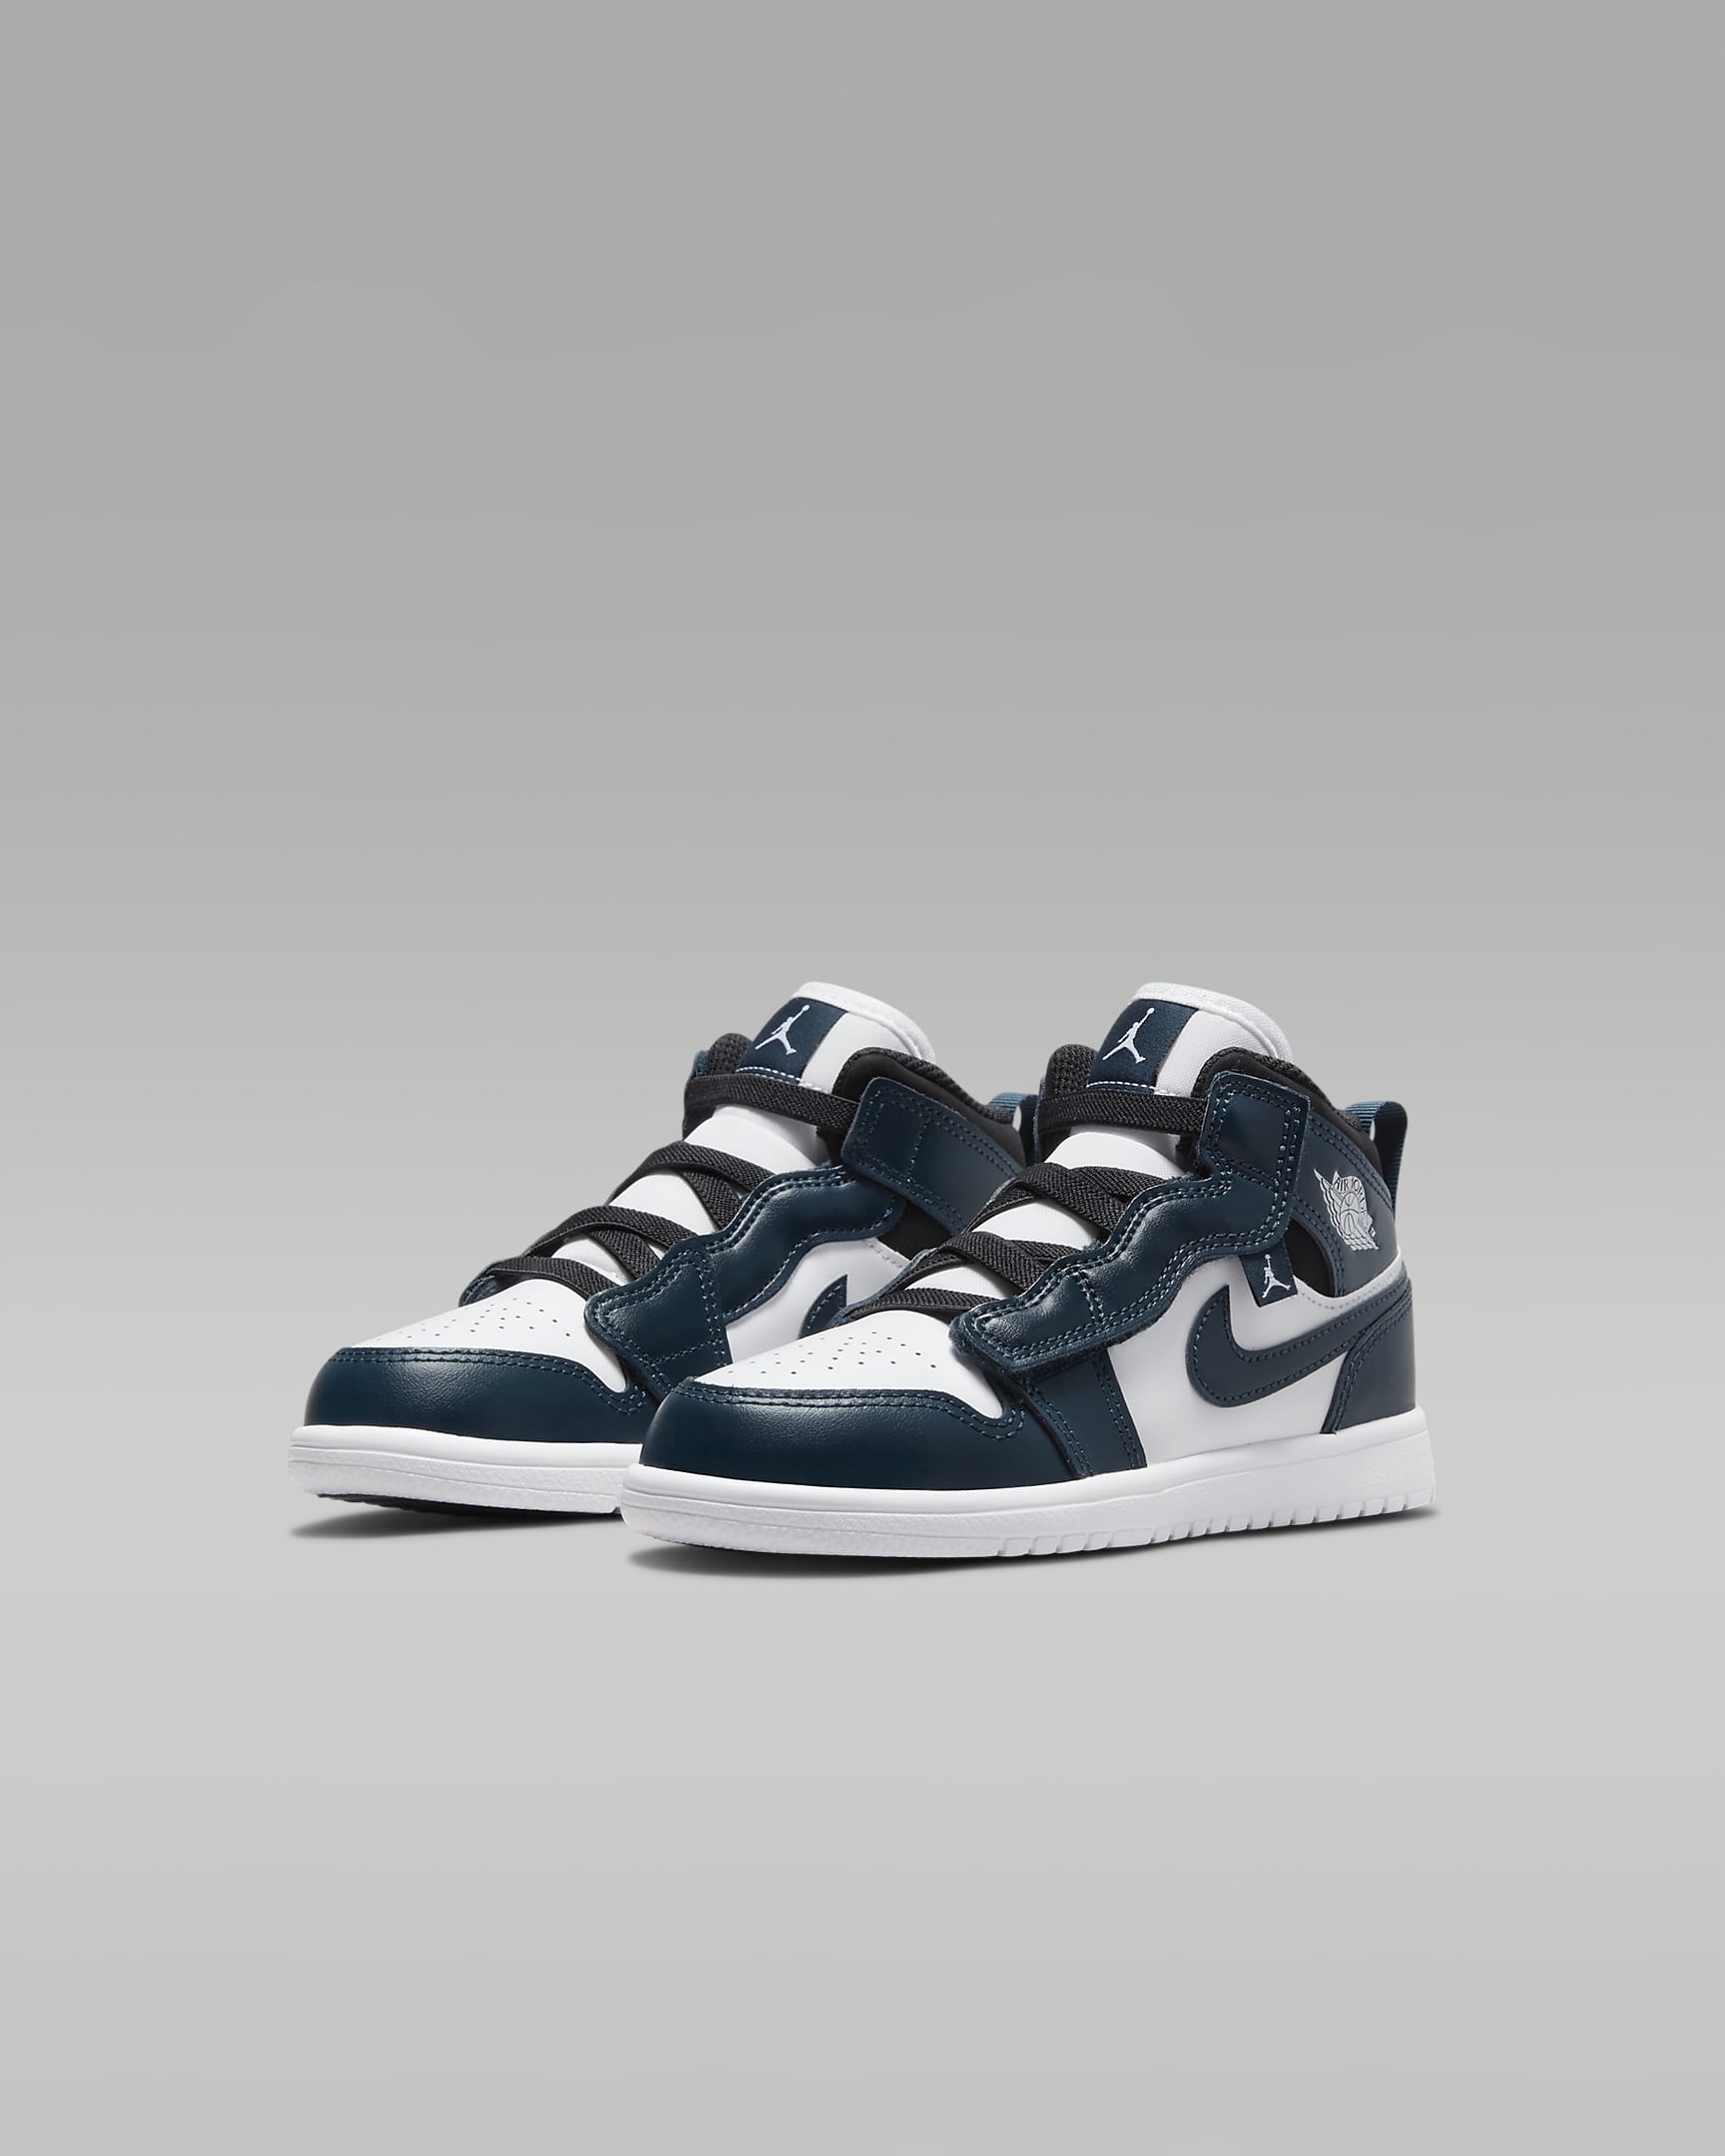 Jordan 1 Mid Younger Kids' Shoes - Armoury Navy/Black/White